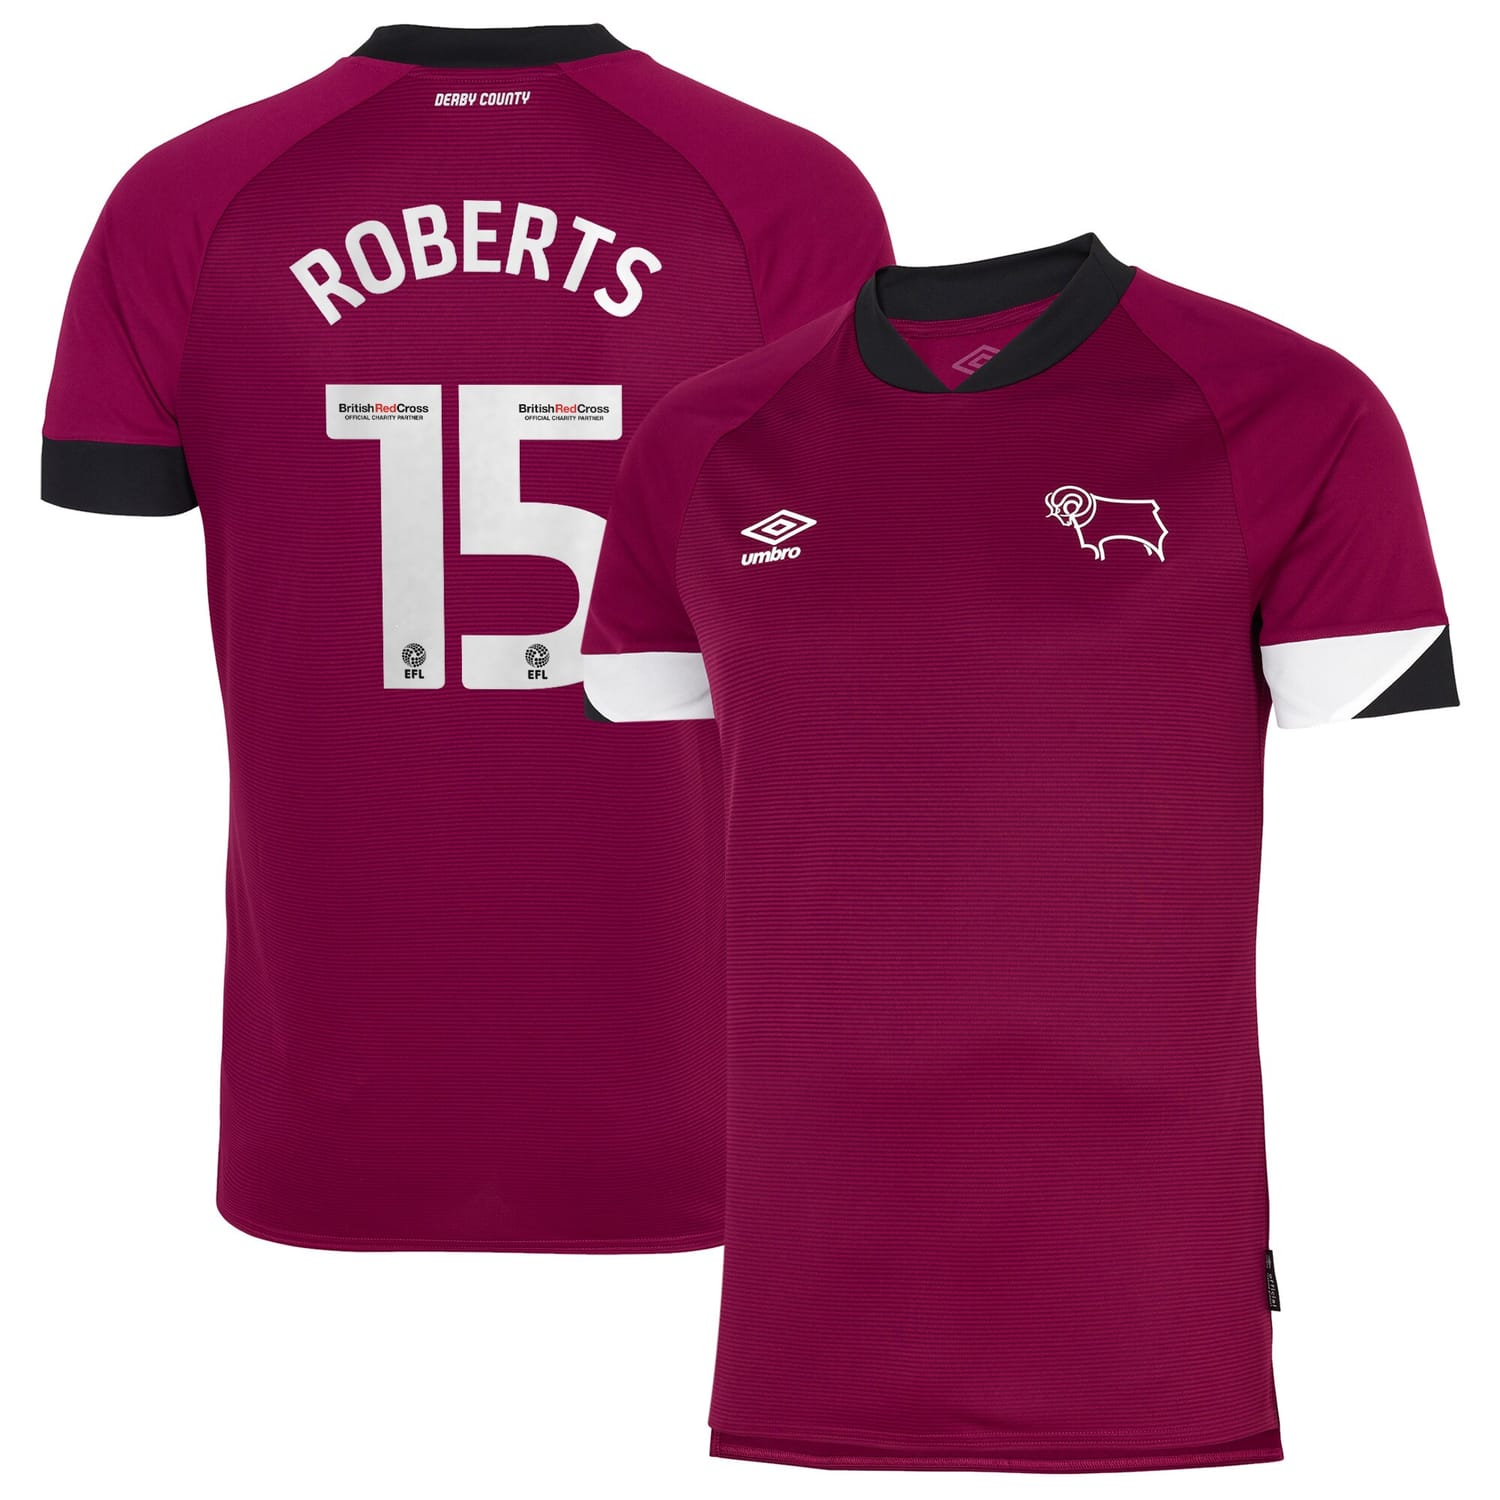 EFL League One Derby County Third Jersey Shirt 2022-23 player Roberts 15 printing for Men